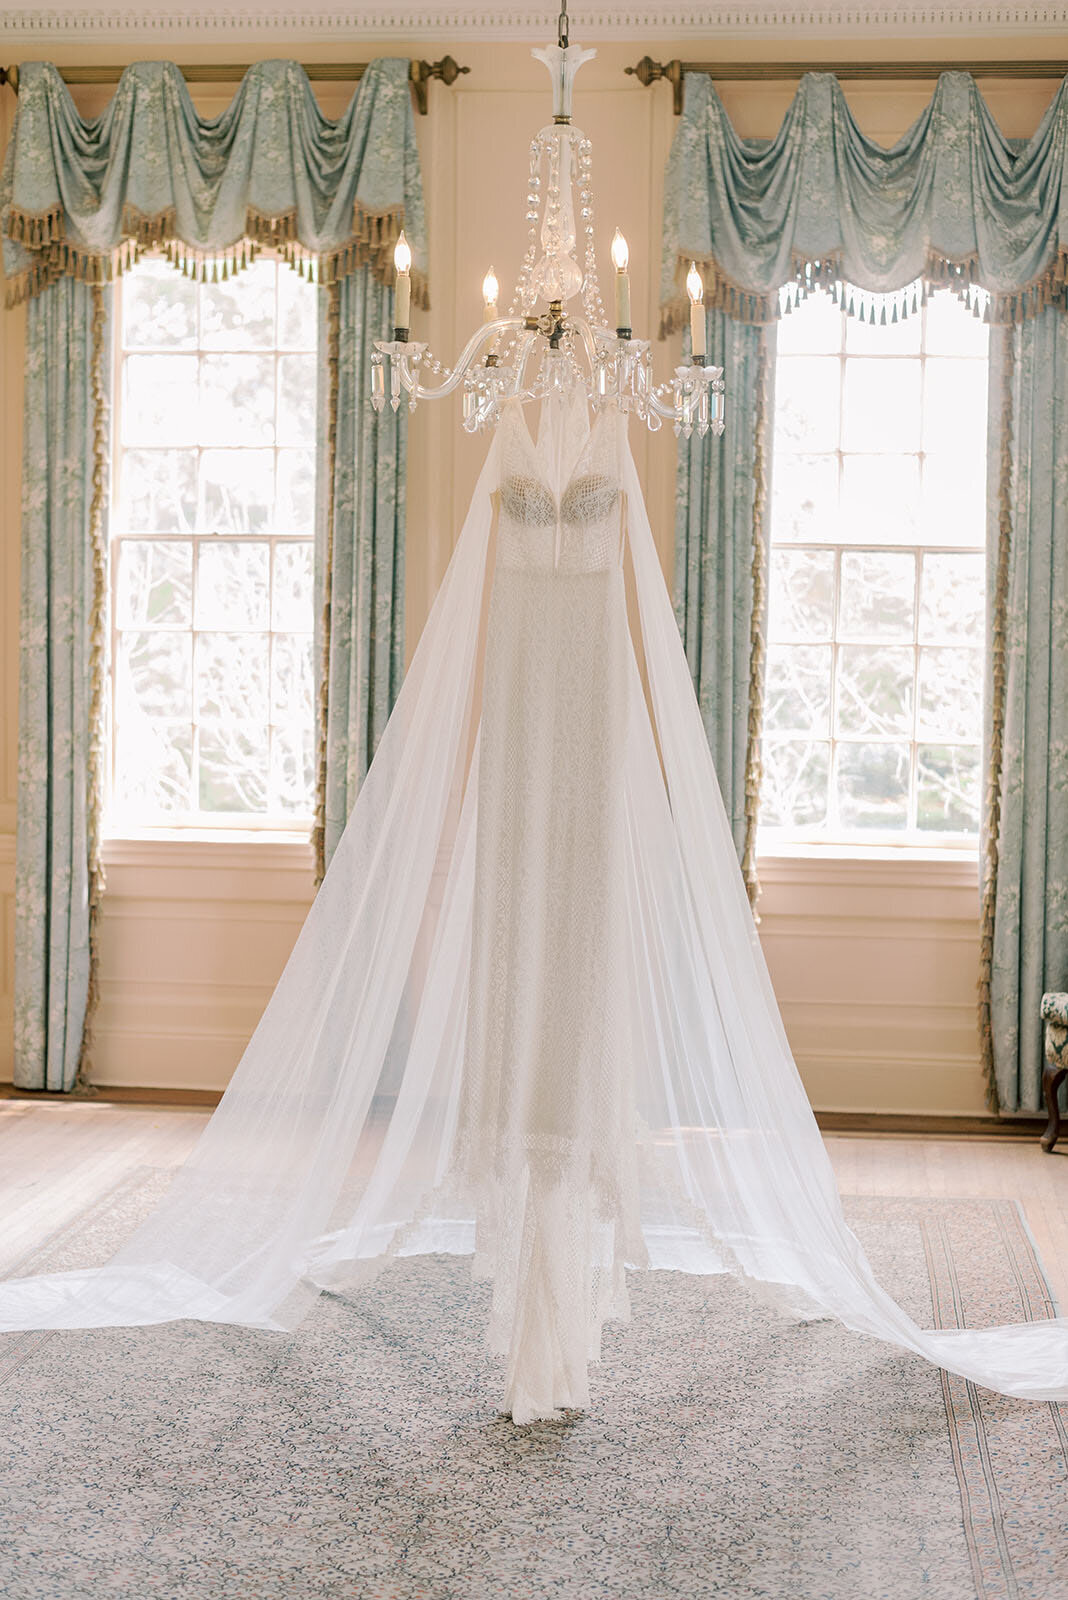 lace wedding gown hanging from chandelier